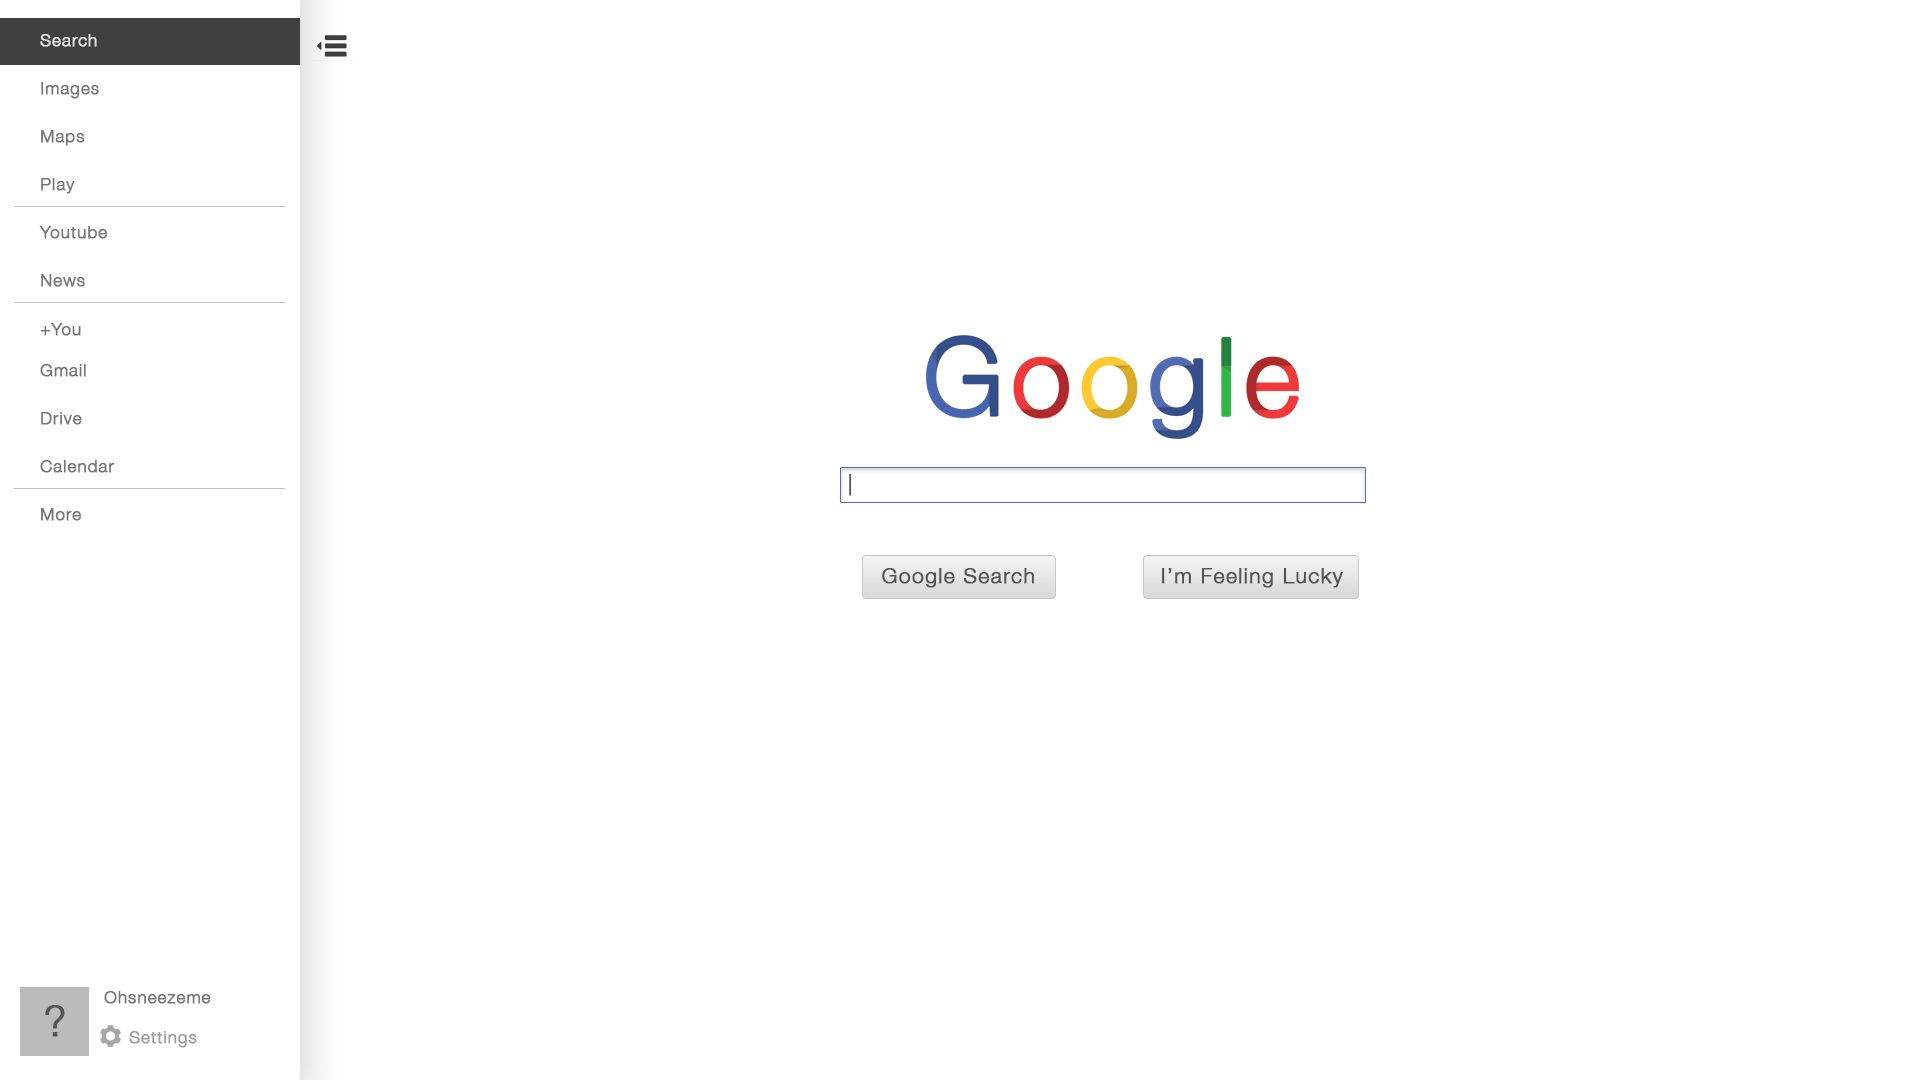 Wallpapers For Google Homepage